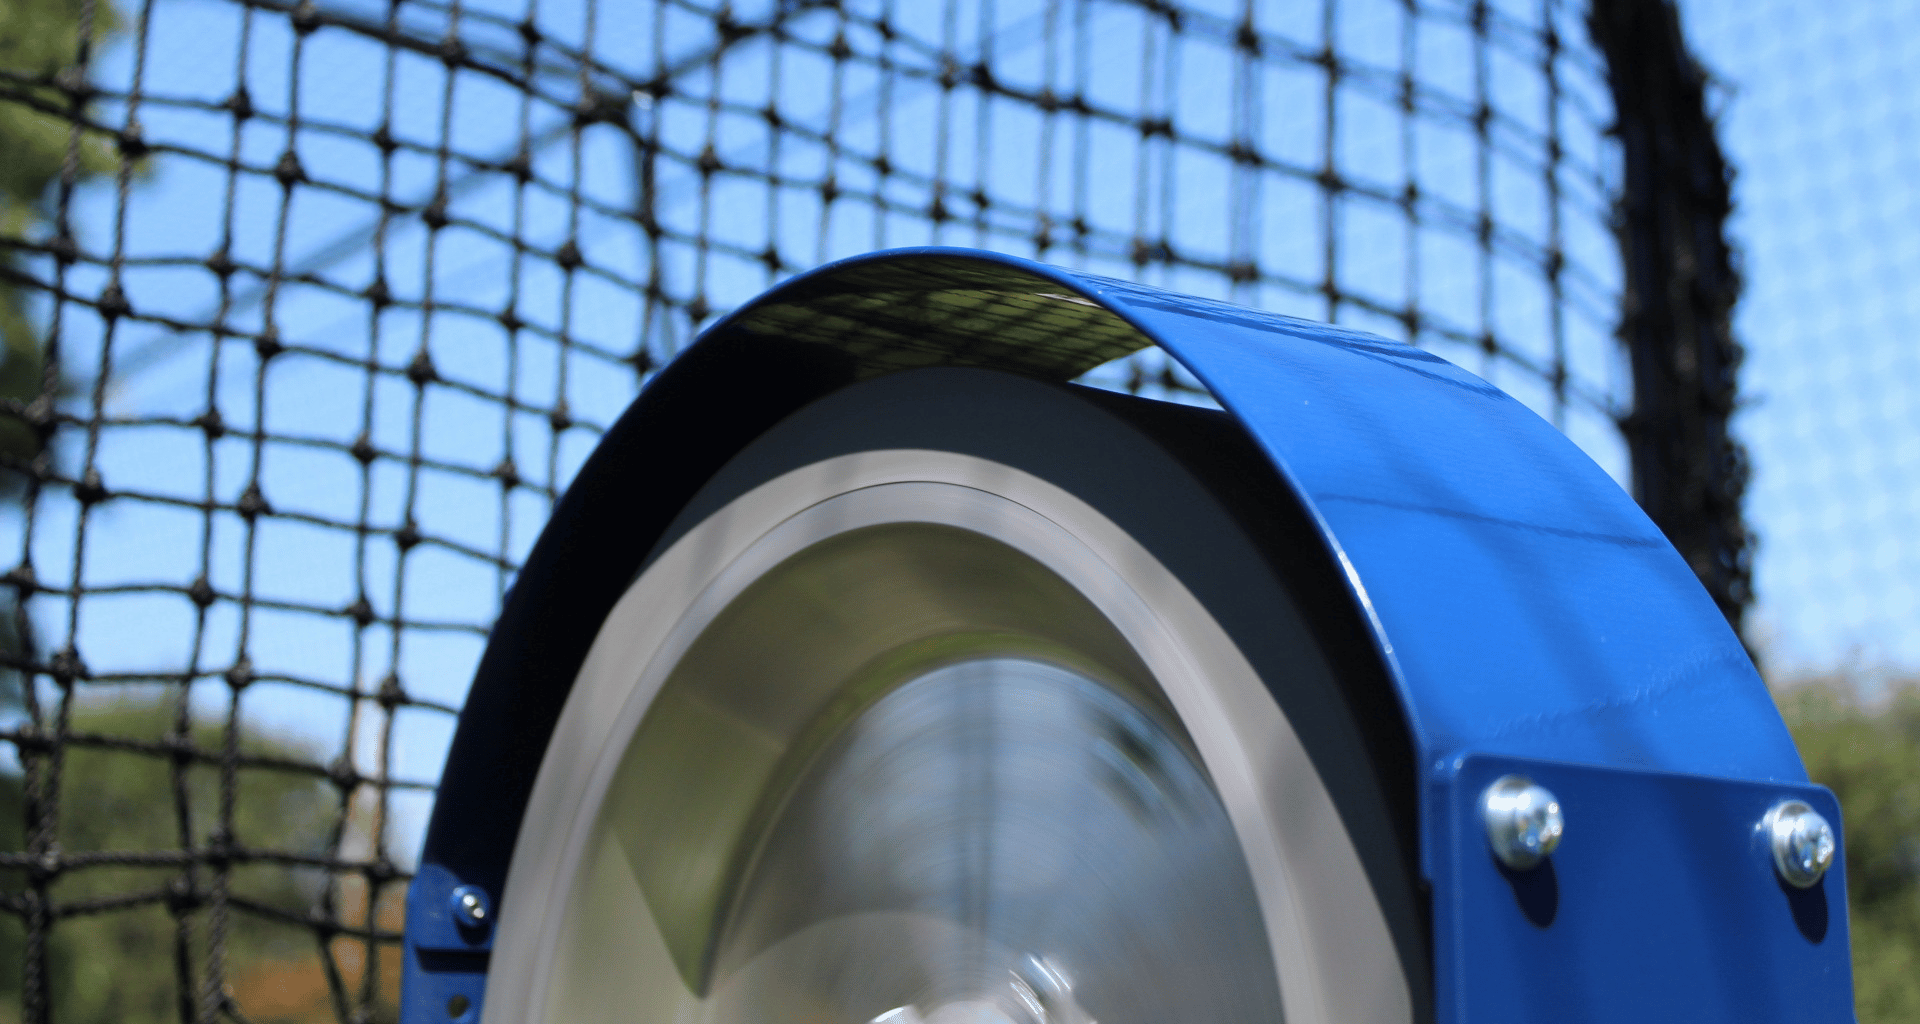 Bata pitching machine up close view of the top fender that protects the wheel